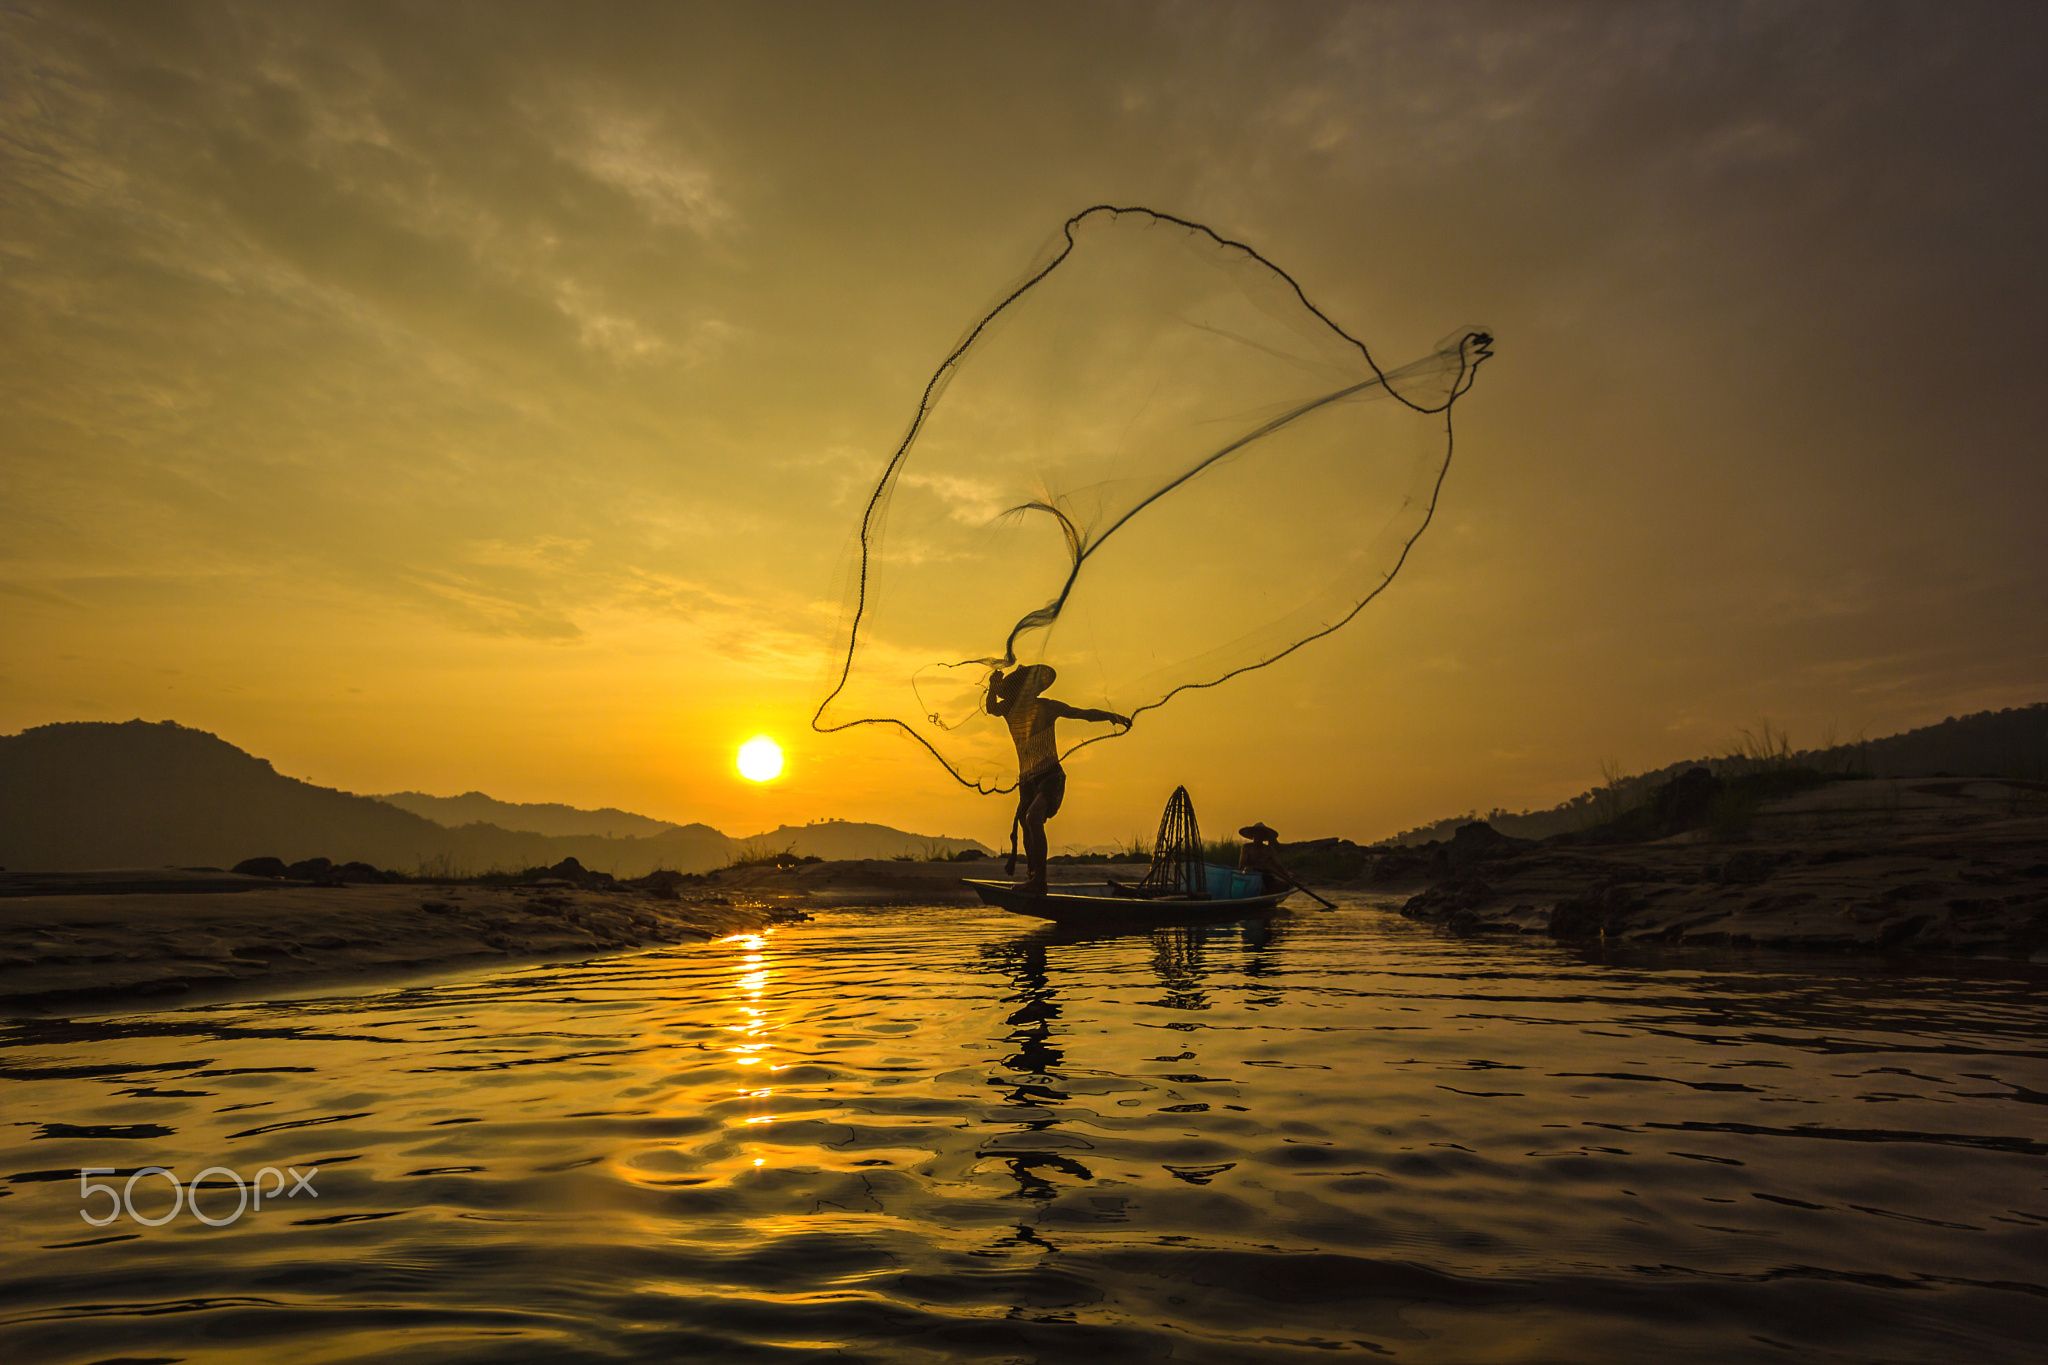 Fishermen fishing nets - Fishermen fishing nets during sunset in the ...